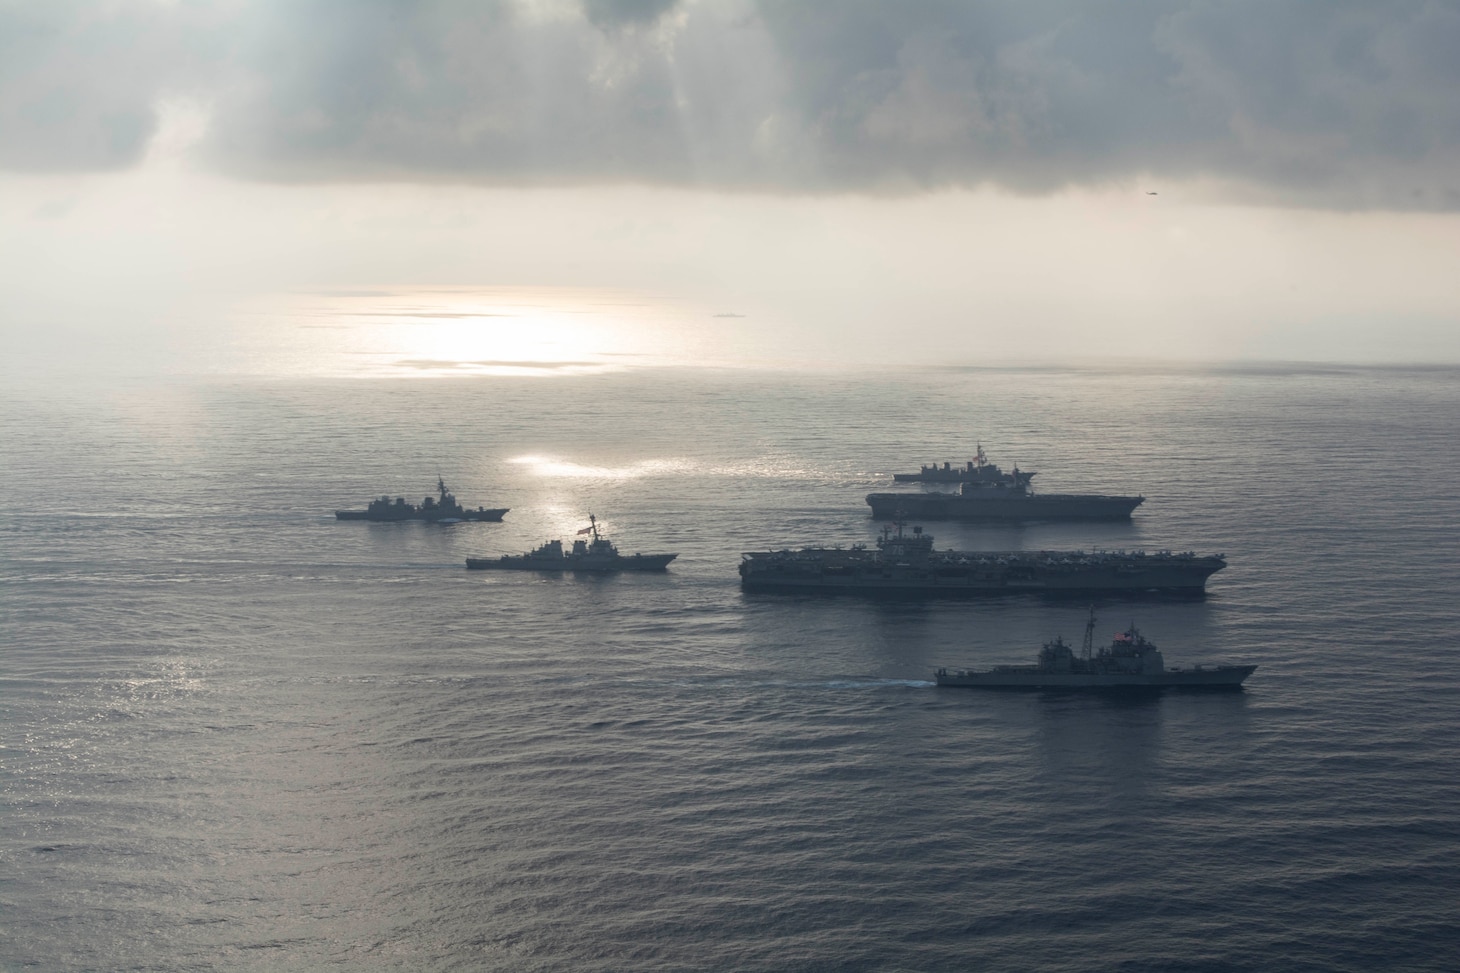 SOUTH CHINA SEA (Aug. 31, 2018) The Ronald Reagan Strike Group ship's aircraft carrier USS Ronald Reagan (CVN 76), the guided-missile destroyer USS Antietam (CG 54) and the guided-missile destroyer USS Milius (DDG 69) conduct a photo exercise with the Japanese Maritime Self-Defense Force ship's the helicopter destroyer JS Kaga (DDH 184), the destroyer JS Inazuma (DD 105) and the destroyer JS Suzutsuki (DD 117). The Ronald Reagan Strike Group is forward-deployed to the U.S. 7th Fleet area of operations in support of security and stability in the Indo-Pacific region.